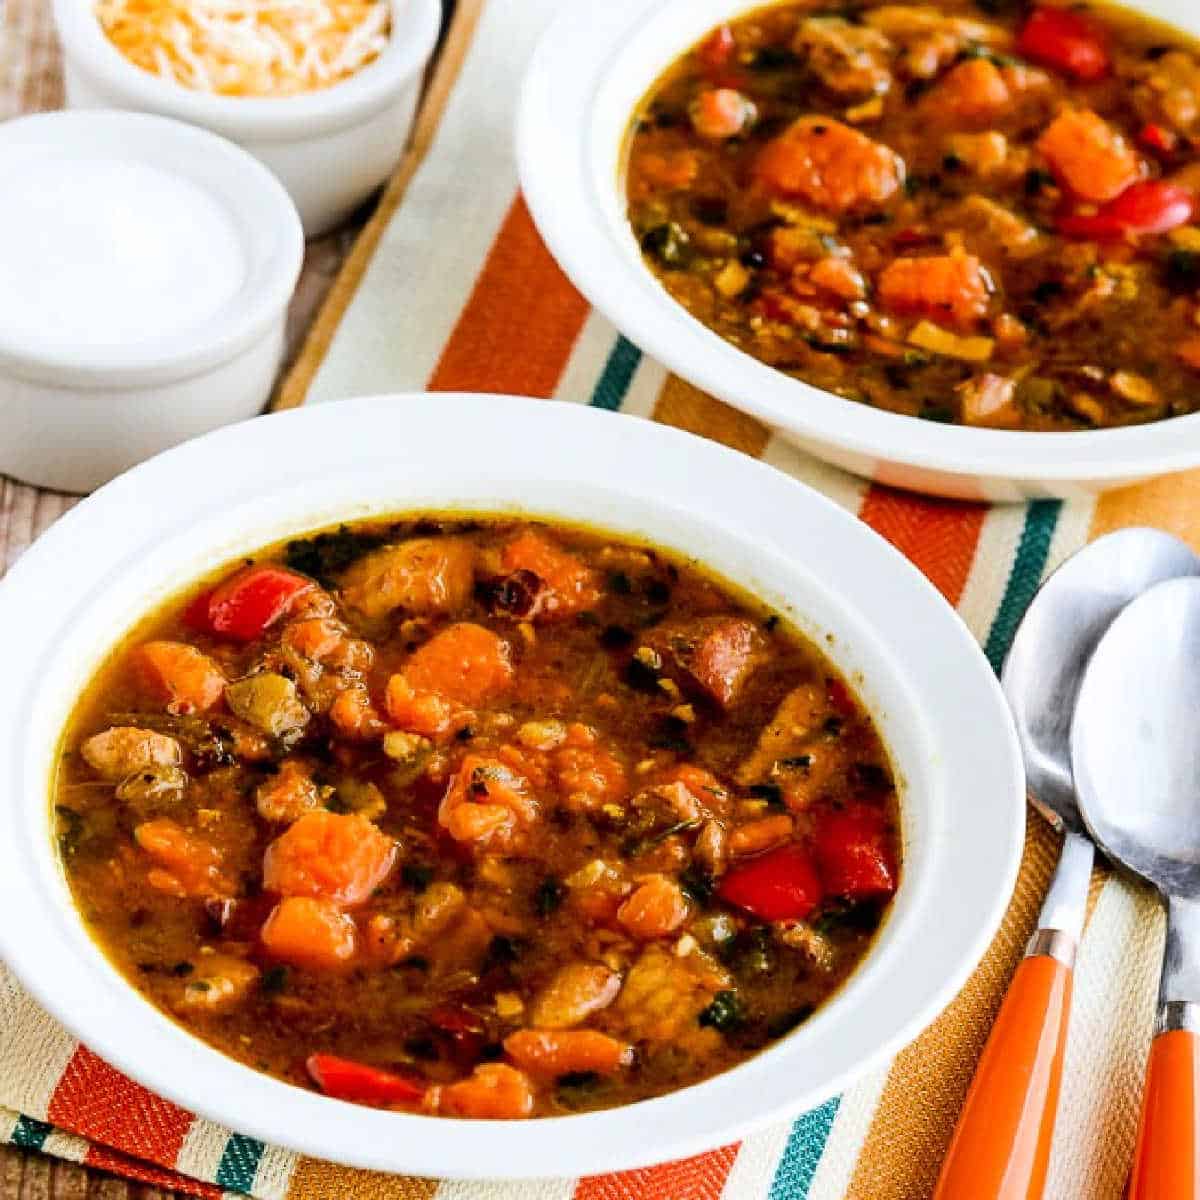 Instant Pot Mexican Pork Stew shown in two bowls.